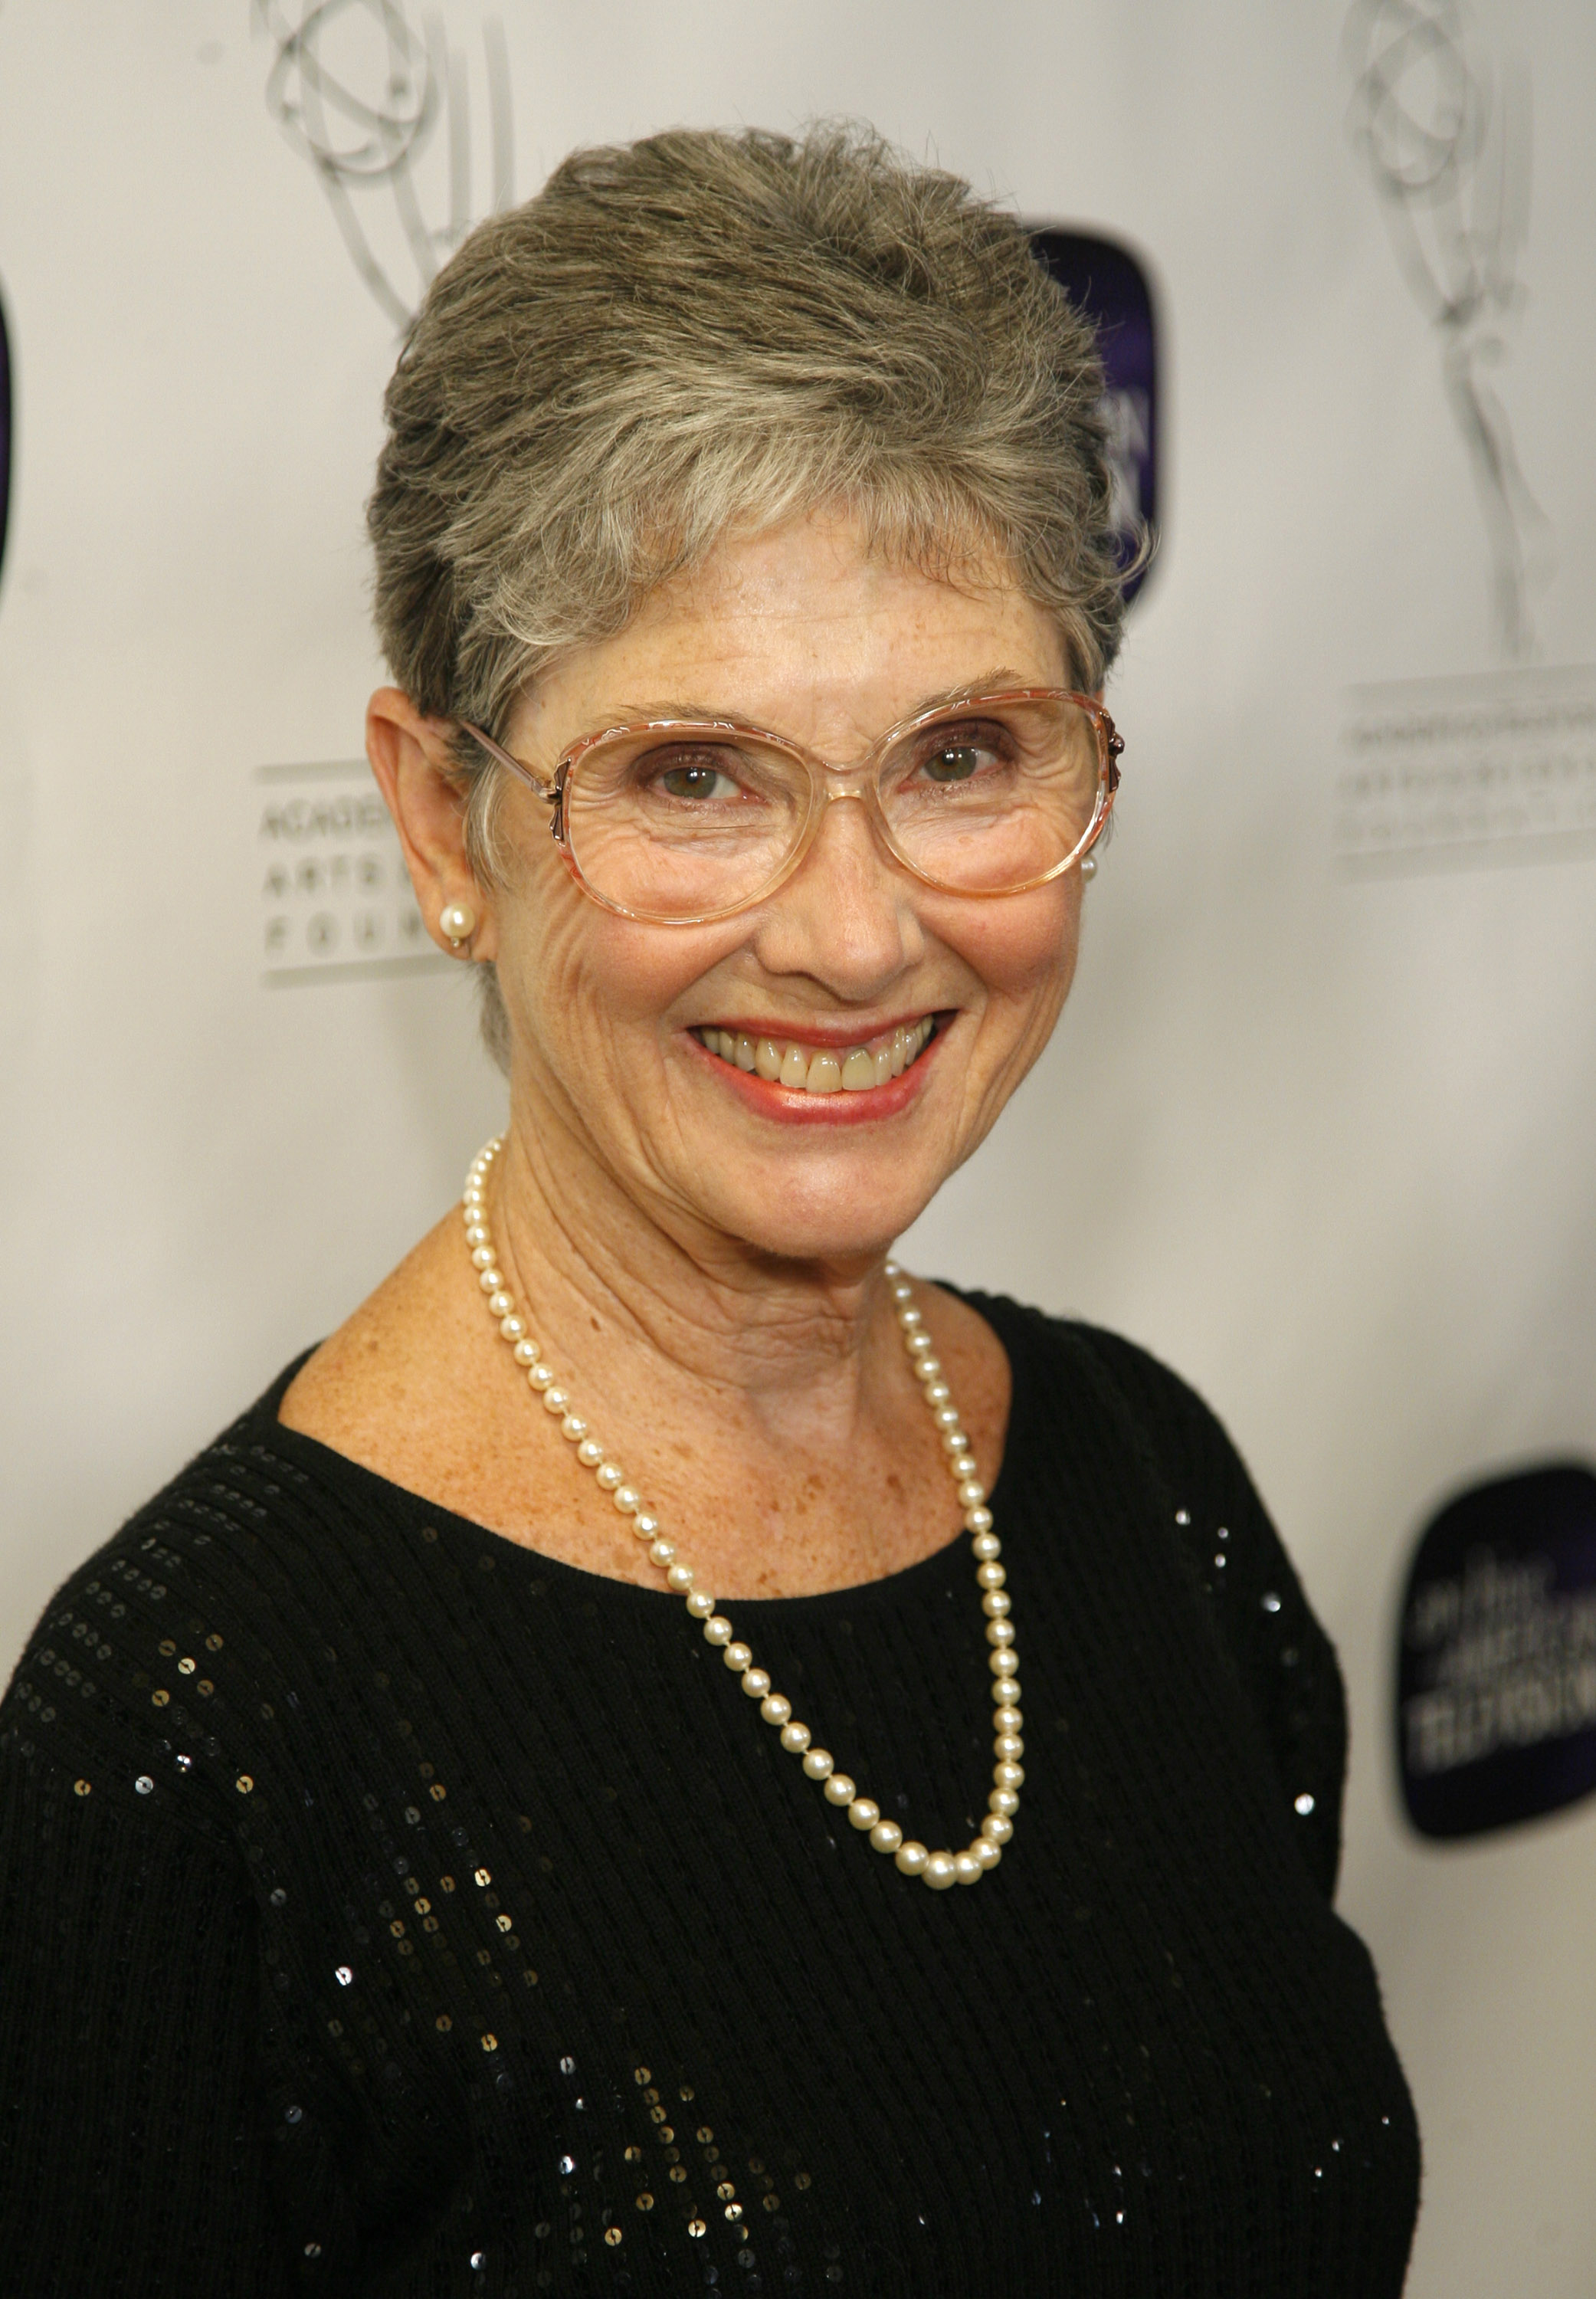 Elinor Donahue at the 10th Anniversary of The Archive of American TV in California in 2007 | Source: Getty Images